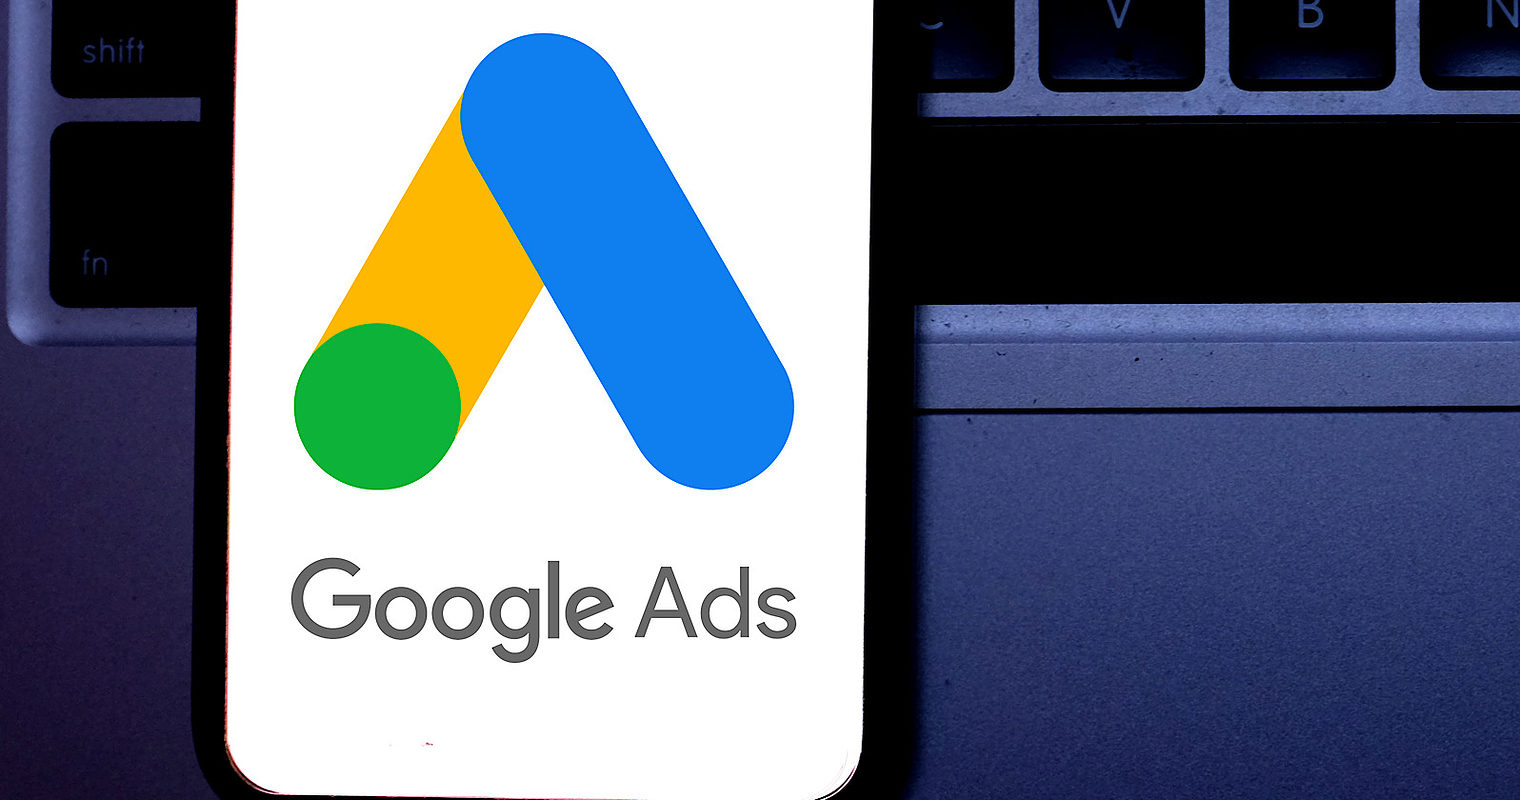 All Google Ads Campaigns to Utilize Standard Delivery As of May 2020